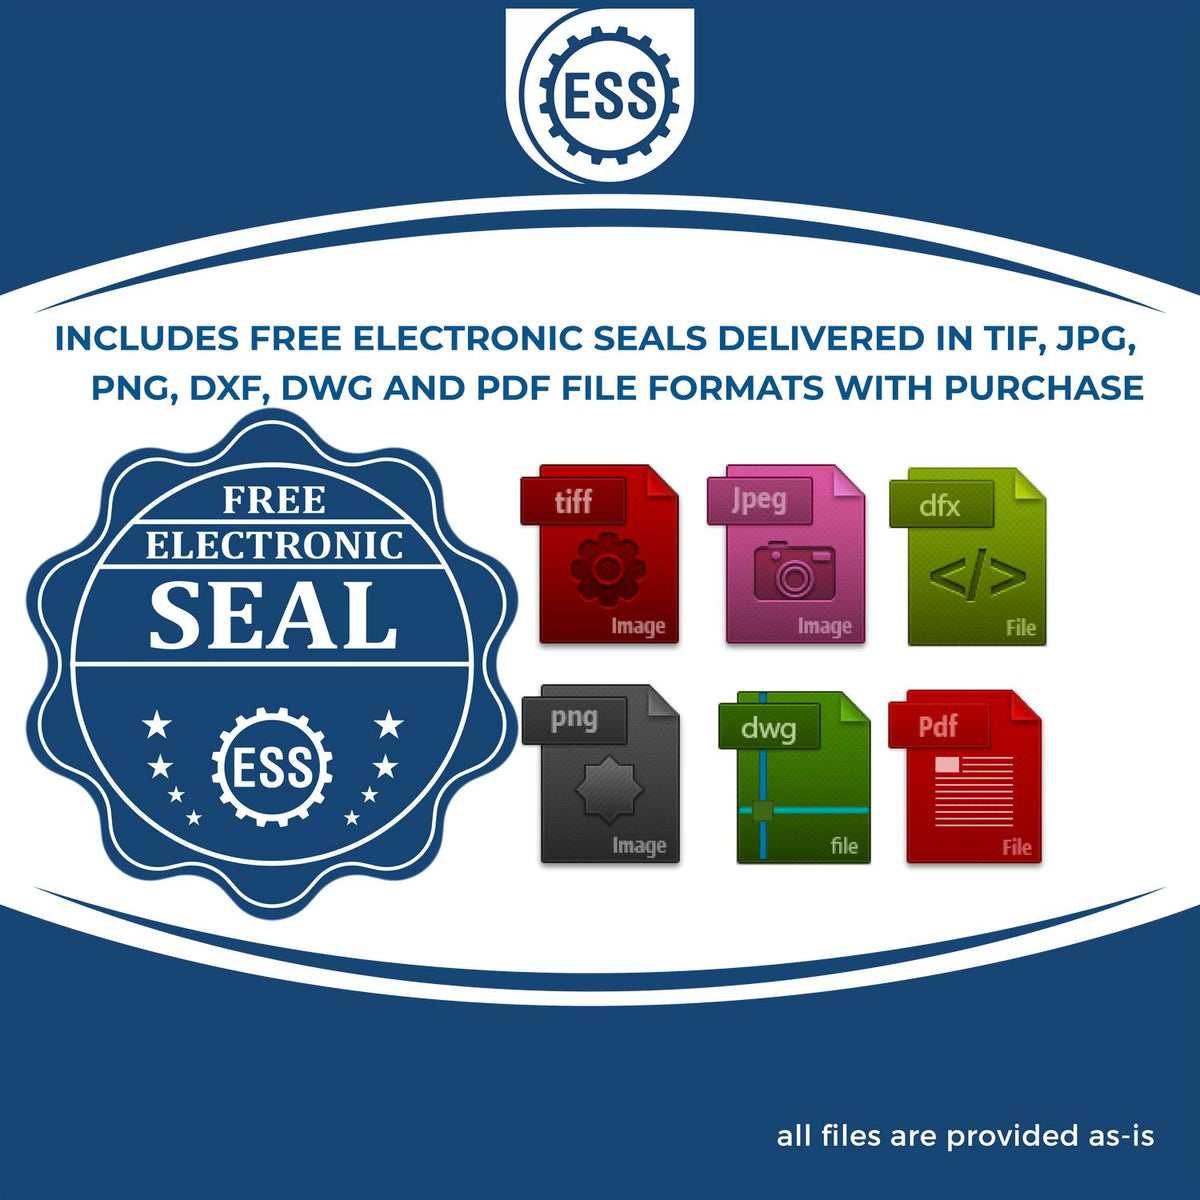 An infographic for the free electronic seal for the Self-Inking Minnesota Geologist Stamp illustrating the different file type icons such as DXF, DWG, TIF, JPG and PNG.